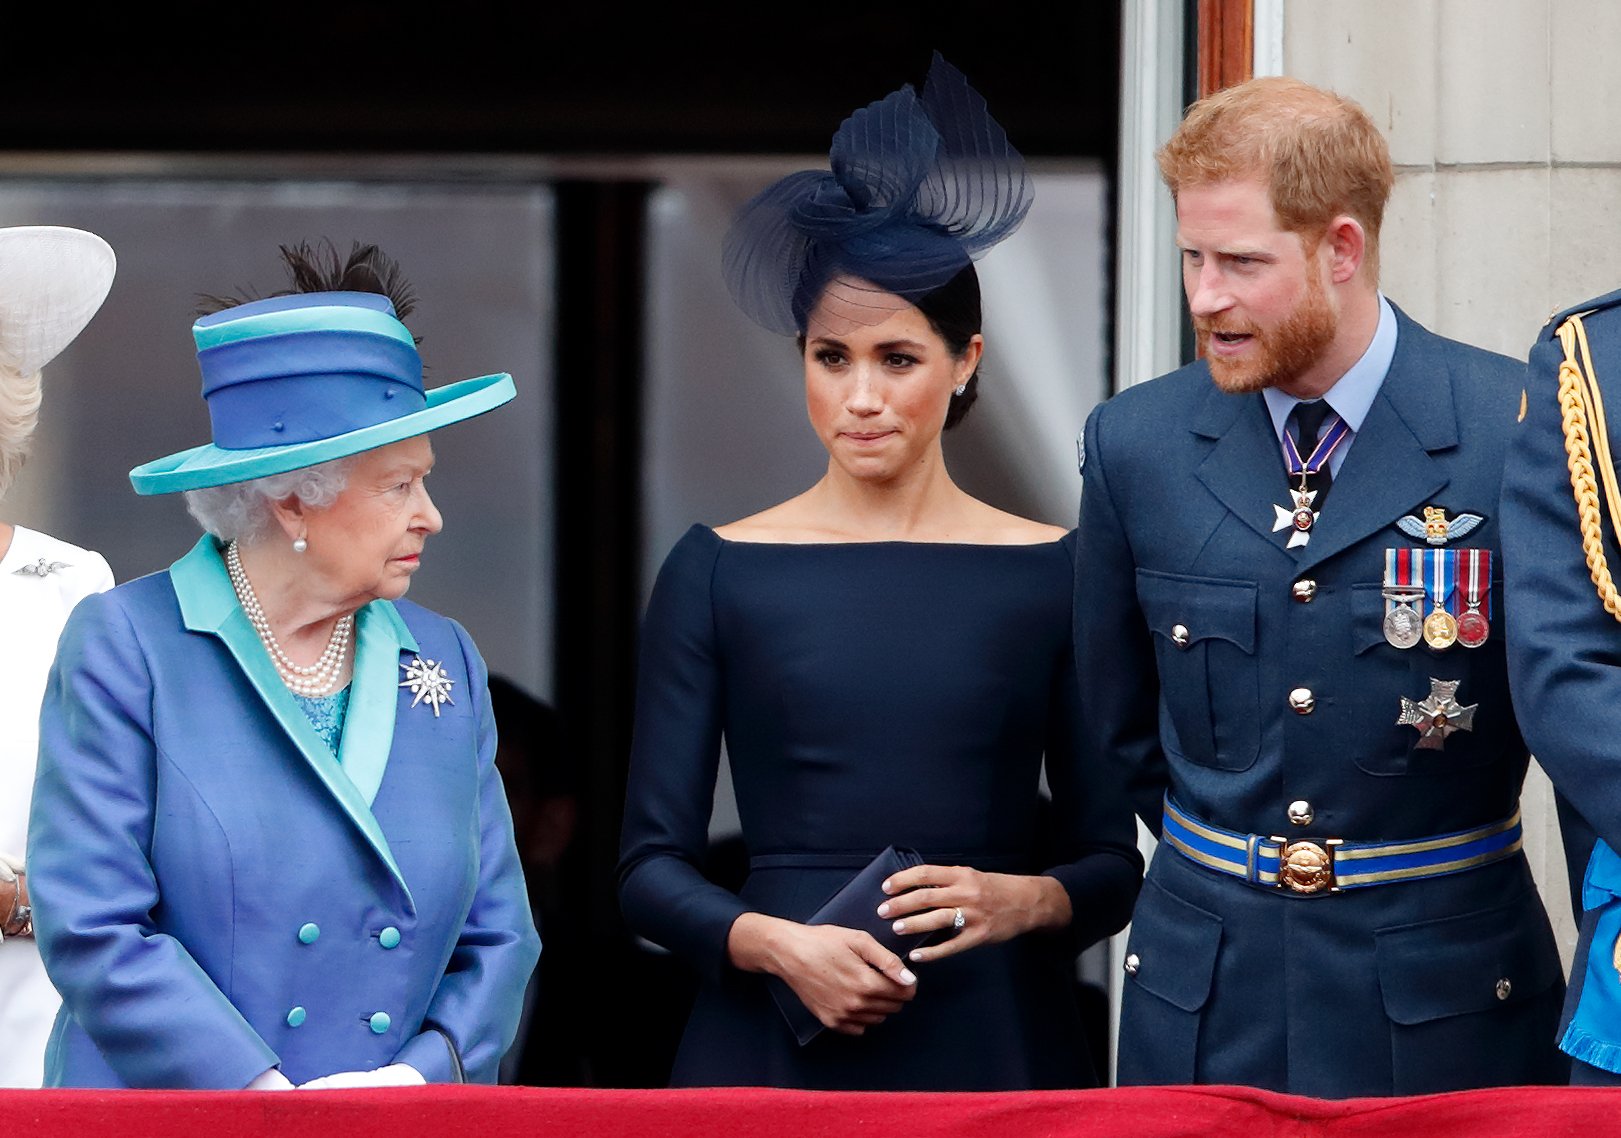 Queen Elizabeth II, Duchess Meghan, and Prince Harry watch a flypast to mark the centenary of the Royal Air Force from the balcony of Buckingham Palace on July 10, 2018, in London, England. | Source: Max Mumby/Indigo/Getty Images